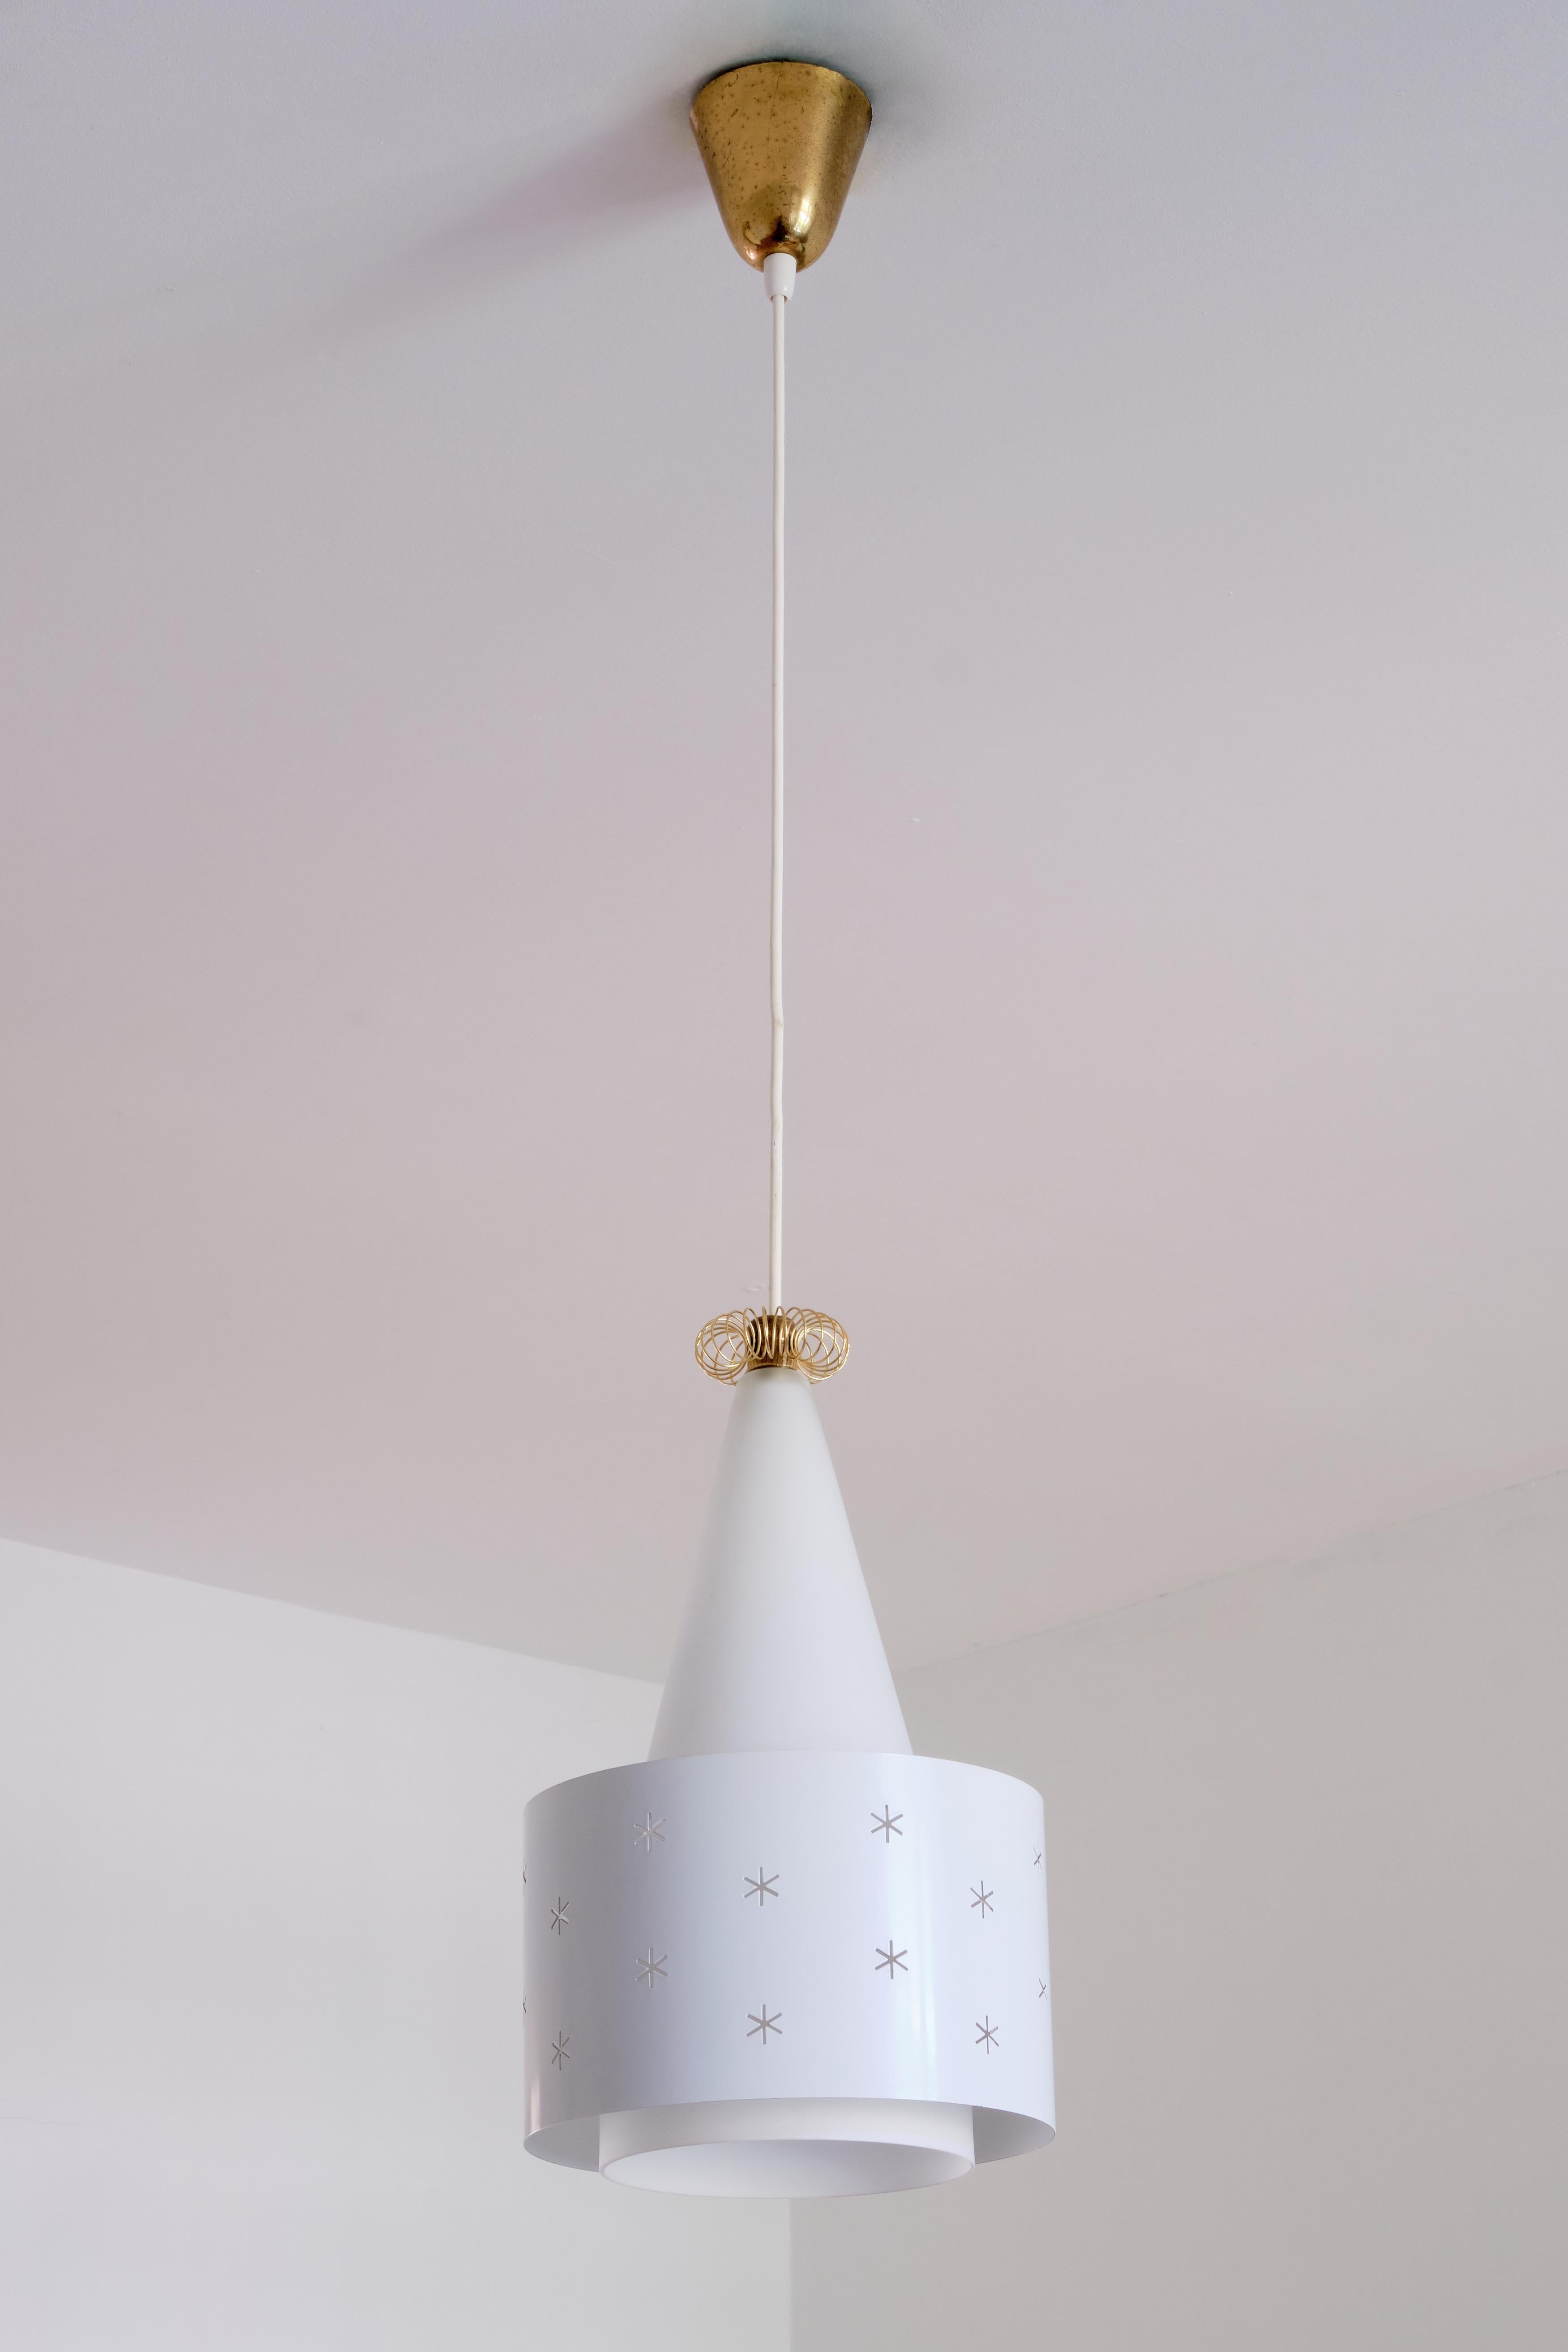 A rare white pendant designed by Paavo Tynell and produced by Idman in 1955. The model number is K2-10/ N-9241. The conical shade is made of a white matte opal glass, resulting in a soft and diffused light. The white painted metal ring appears to